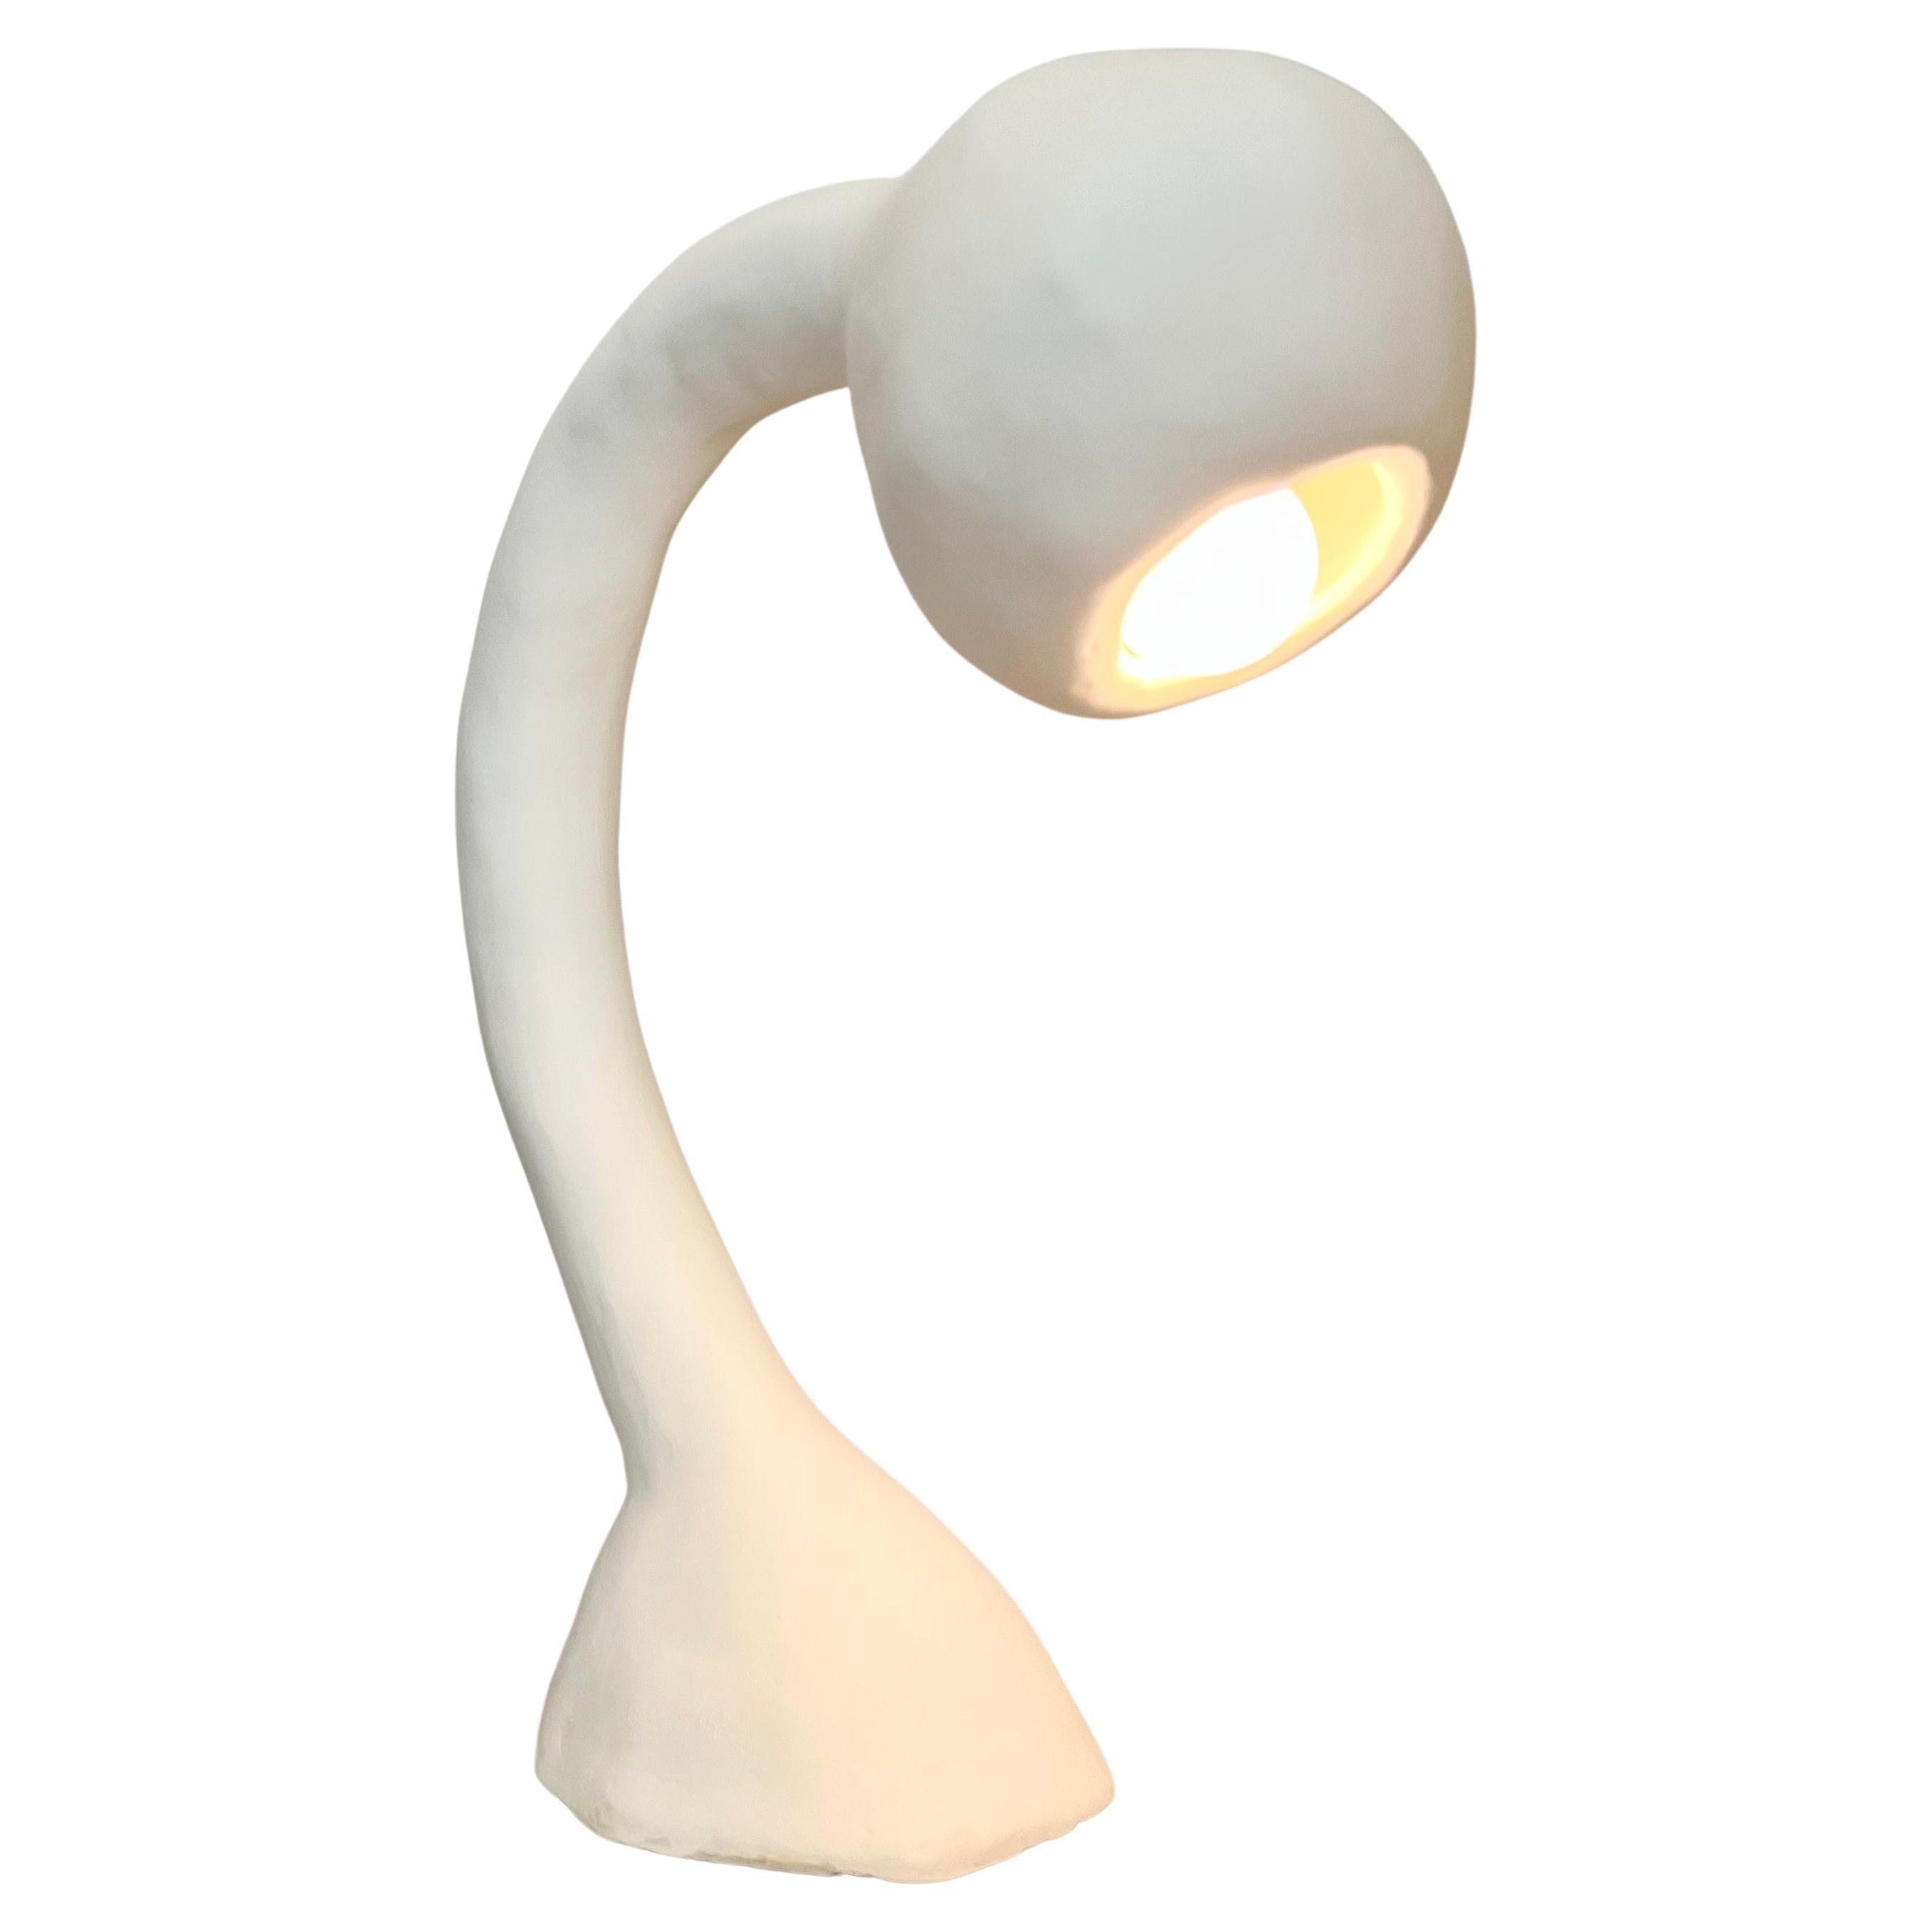 Biomorphic Line by Studio Chora, Table Lamp, White Lime Plaster, Made-To-Order